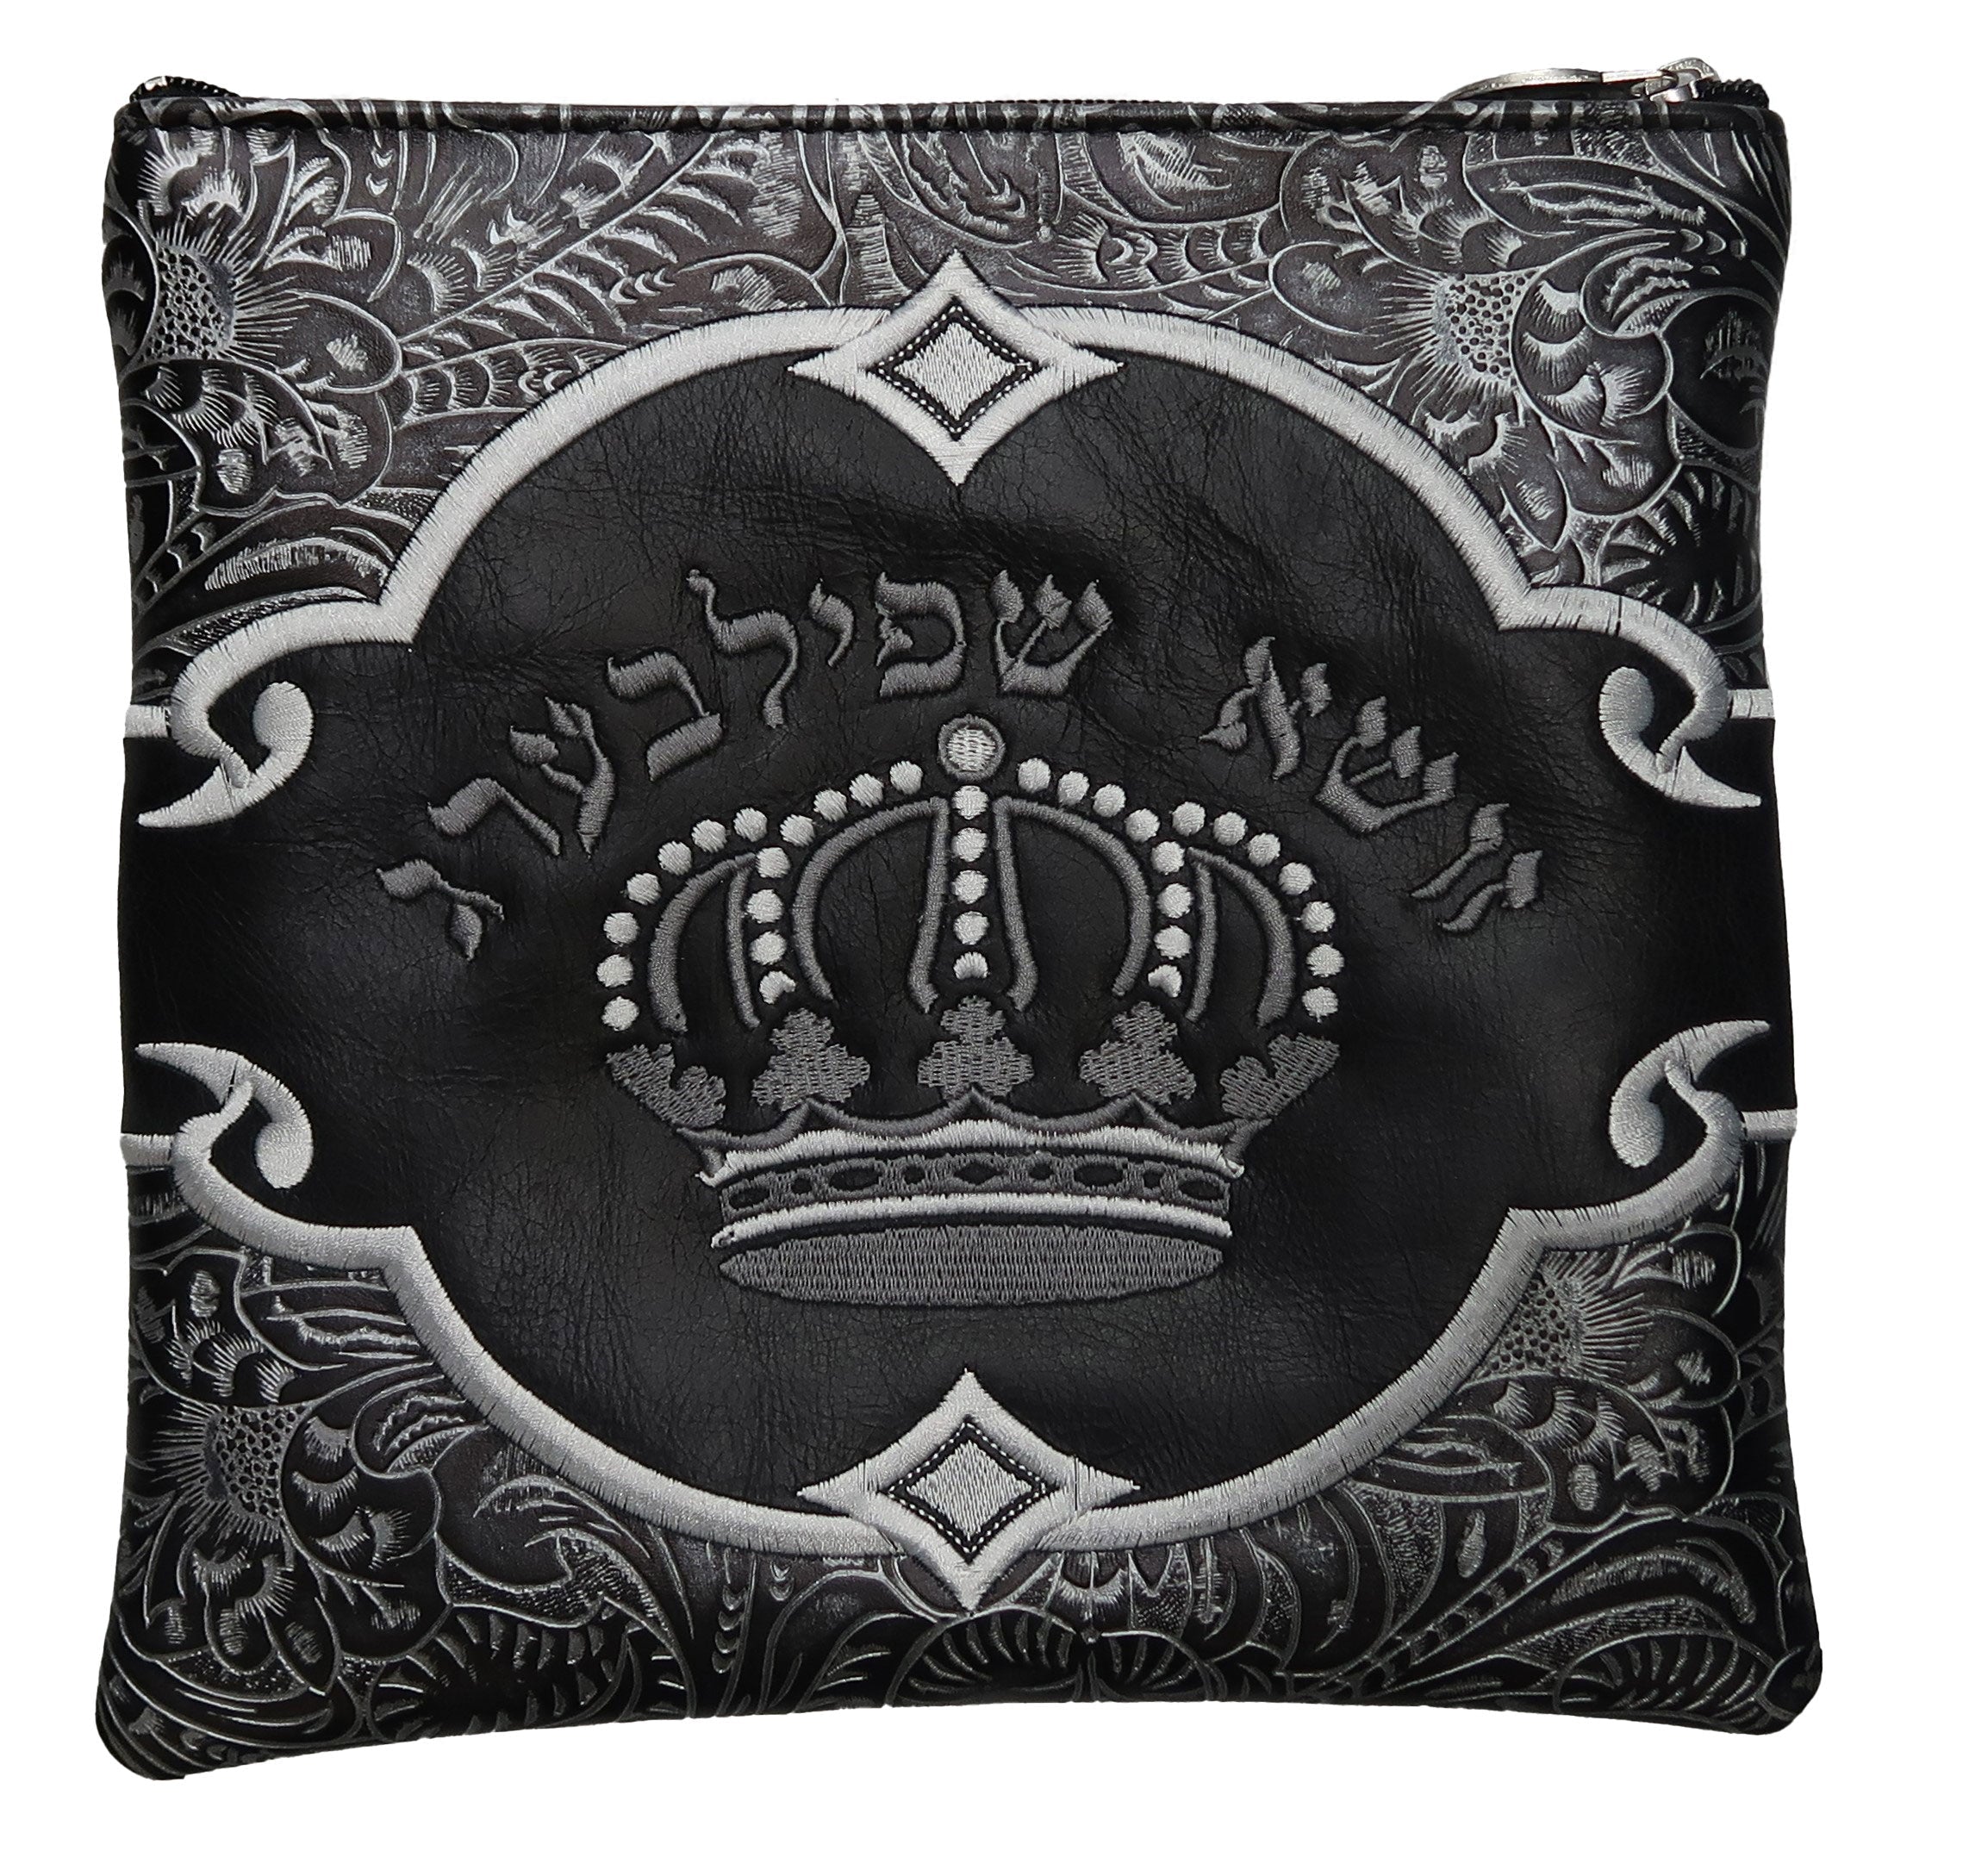 Stunning black and silver Tallis and tefillin bag with regal swirls, diamond and crown design